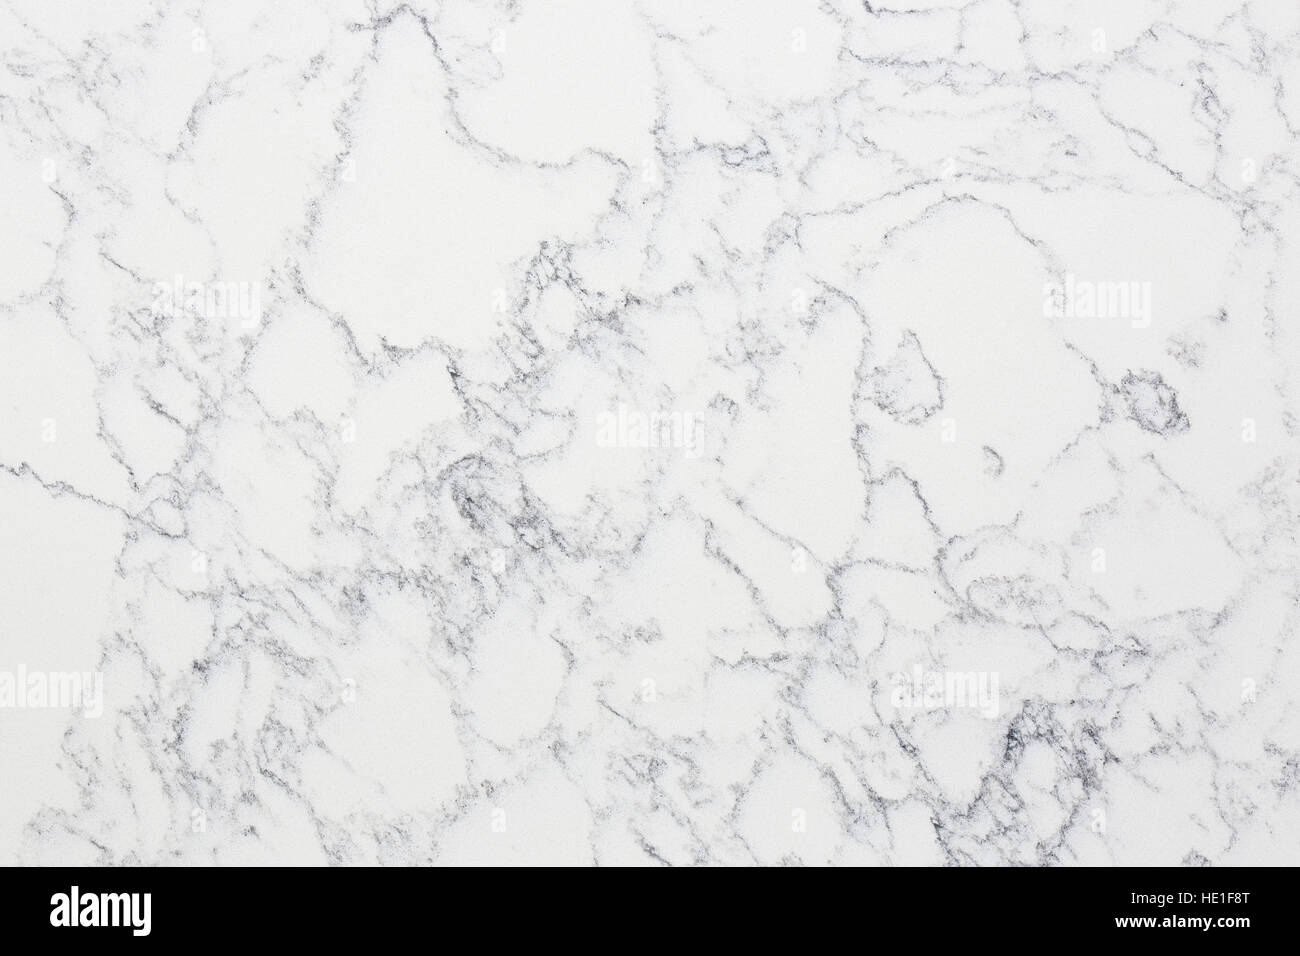 Gray patterned detailed structure of white marble pattern texture and background for product design Stock Photo